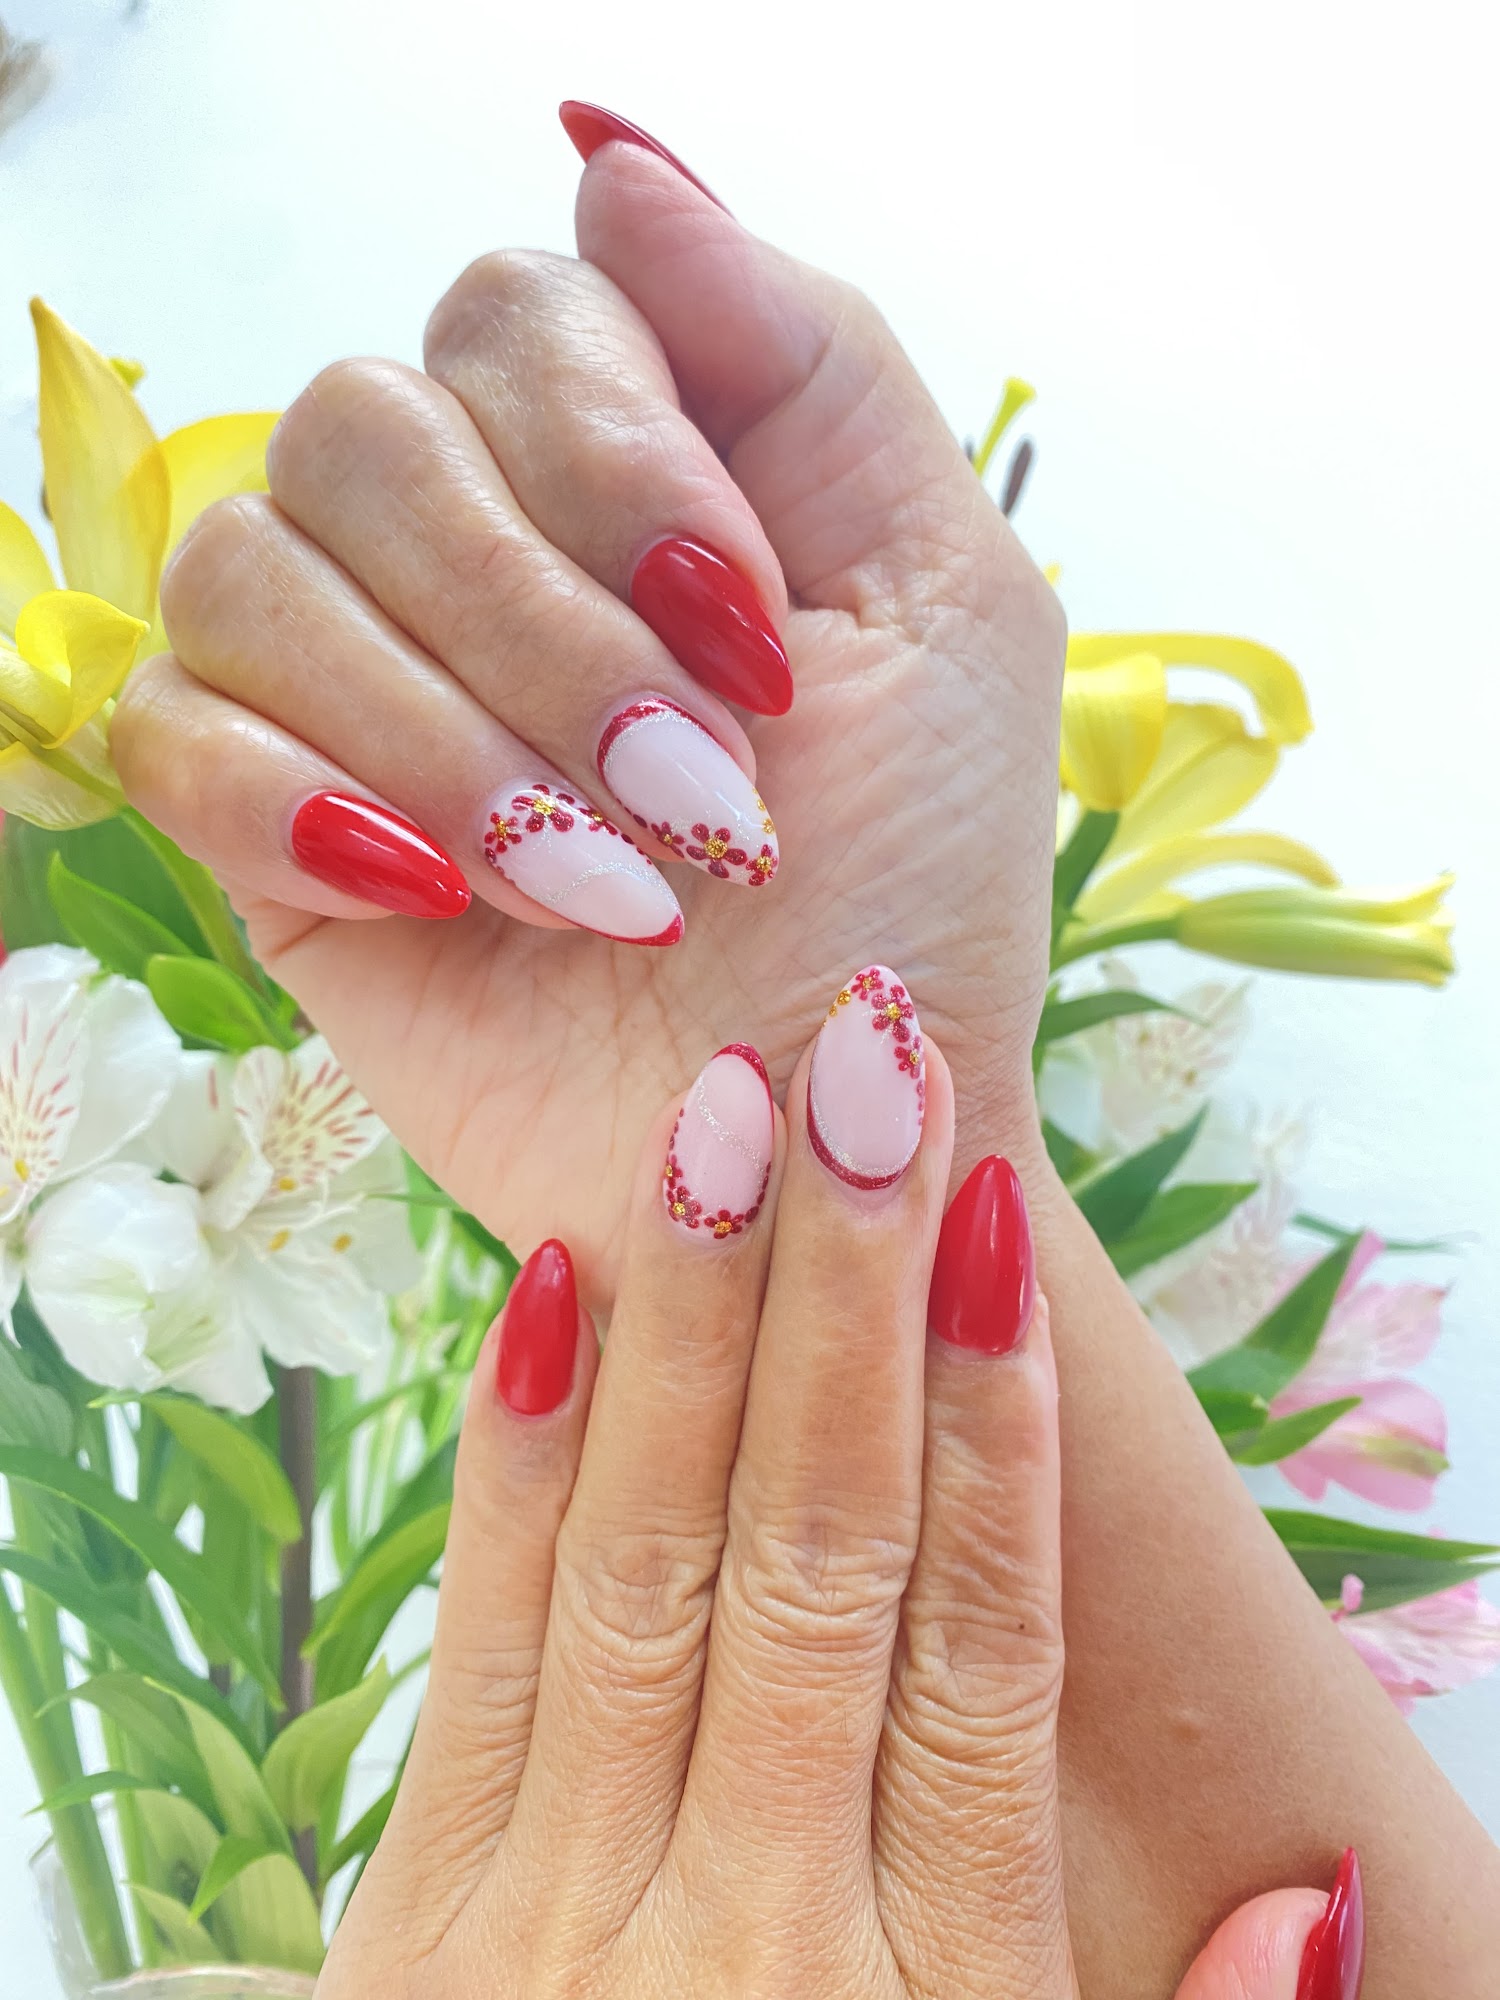 Best Nails and Spa 99 Chelmsford Rd #4, North Billerica Massachusetts 01862